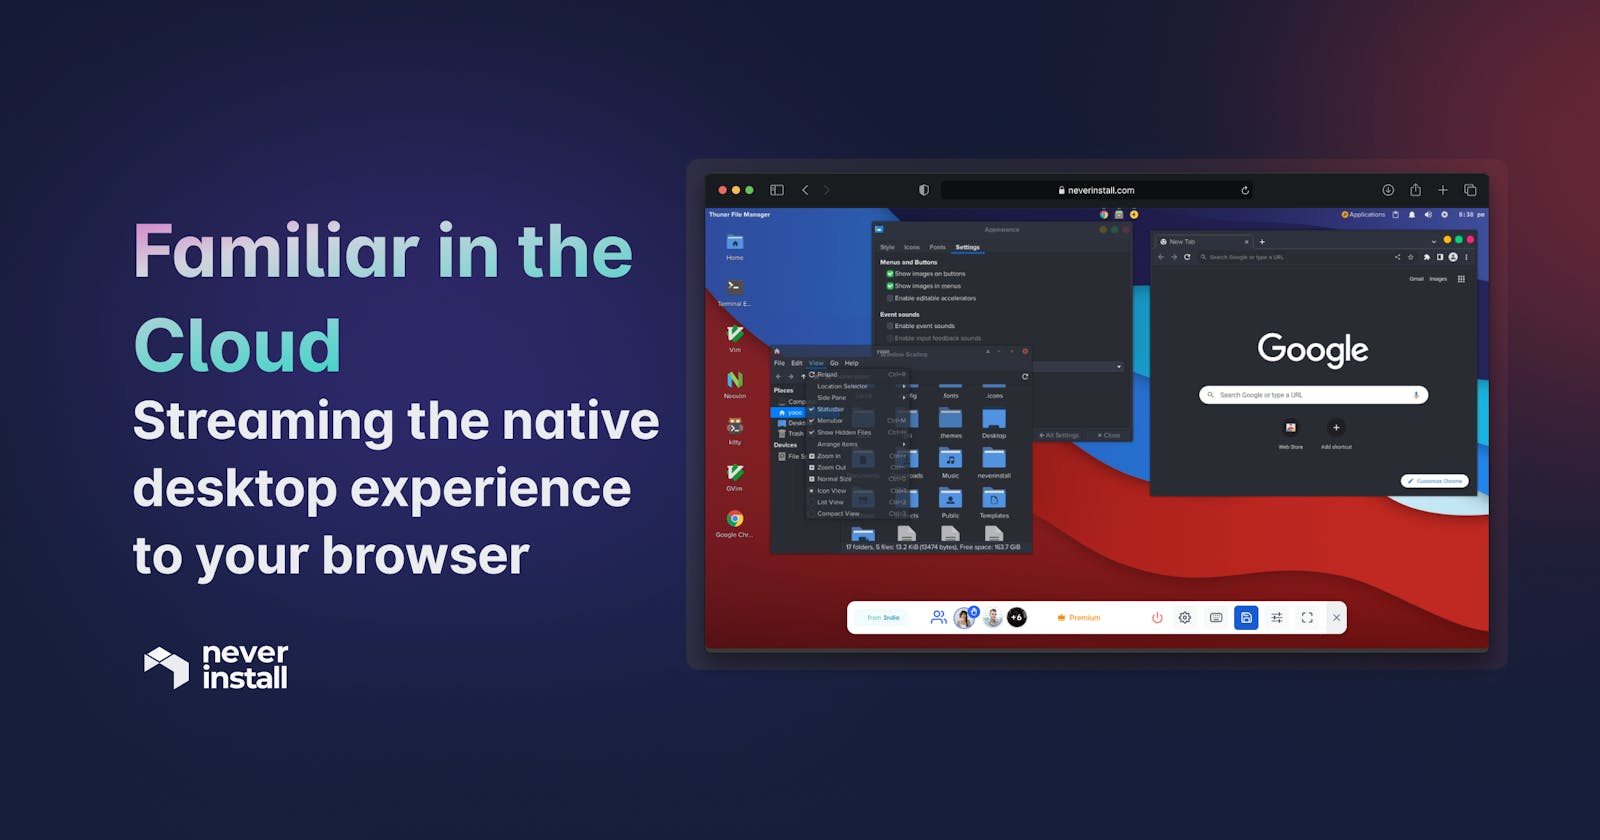 Familiar in the Cloud: Streaming the native desktop experience to your browser